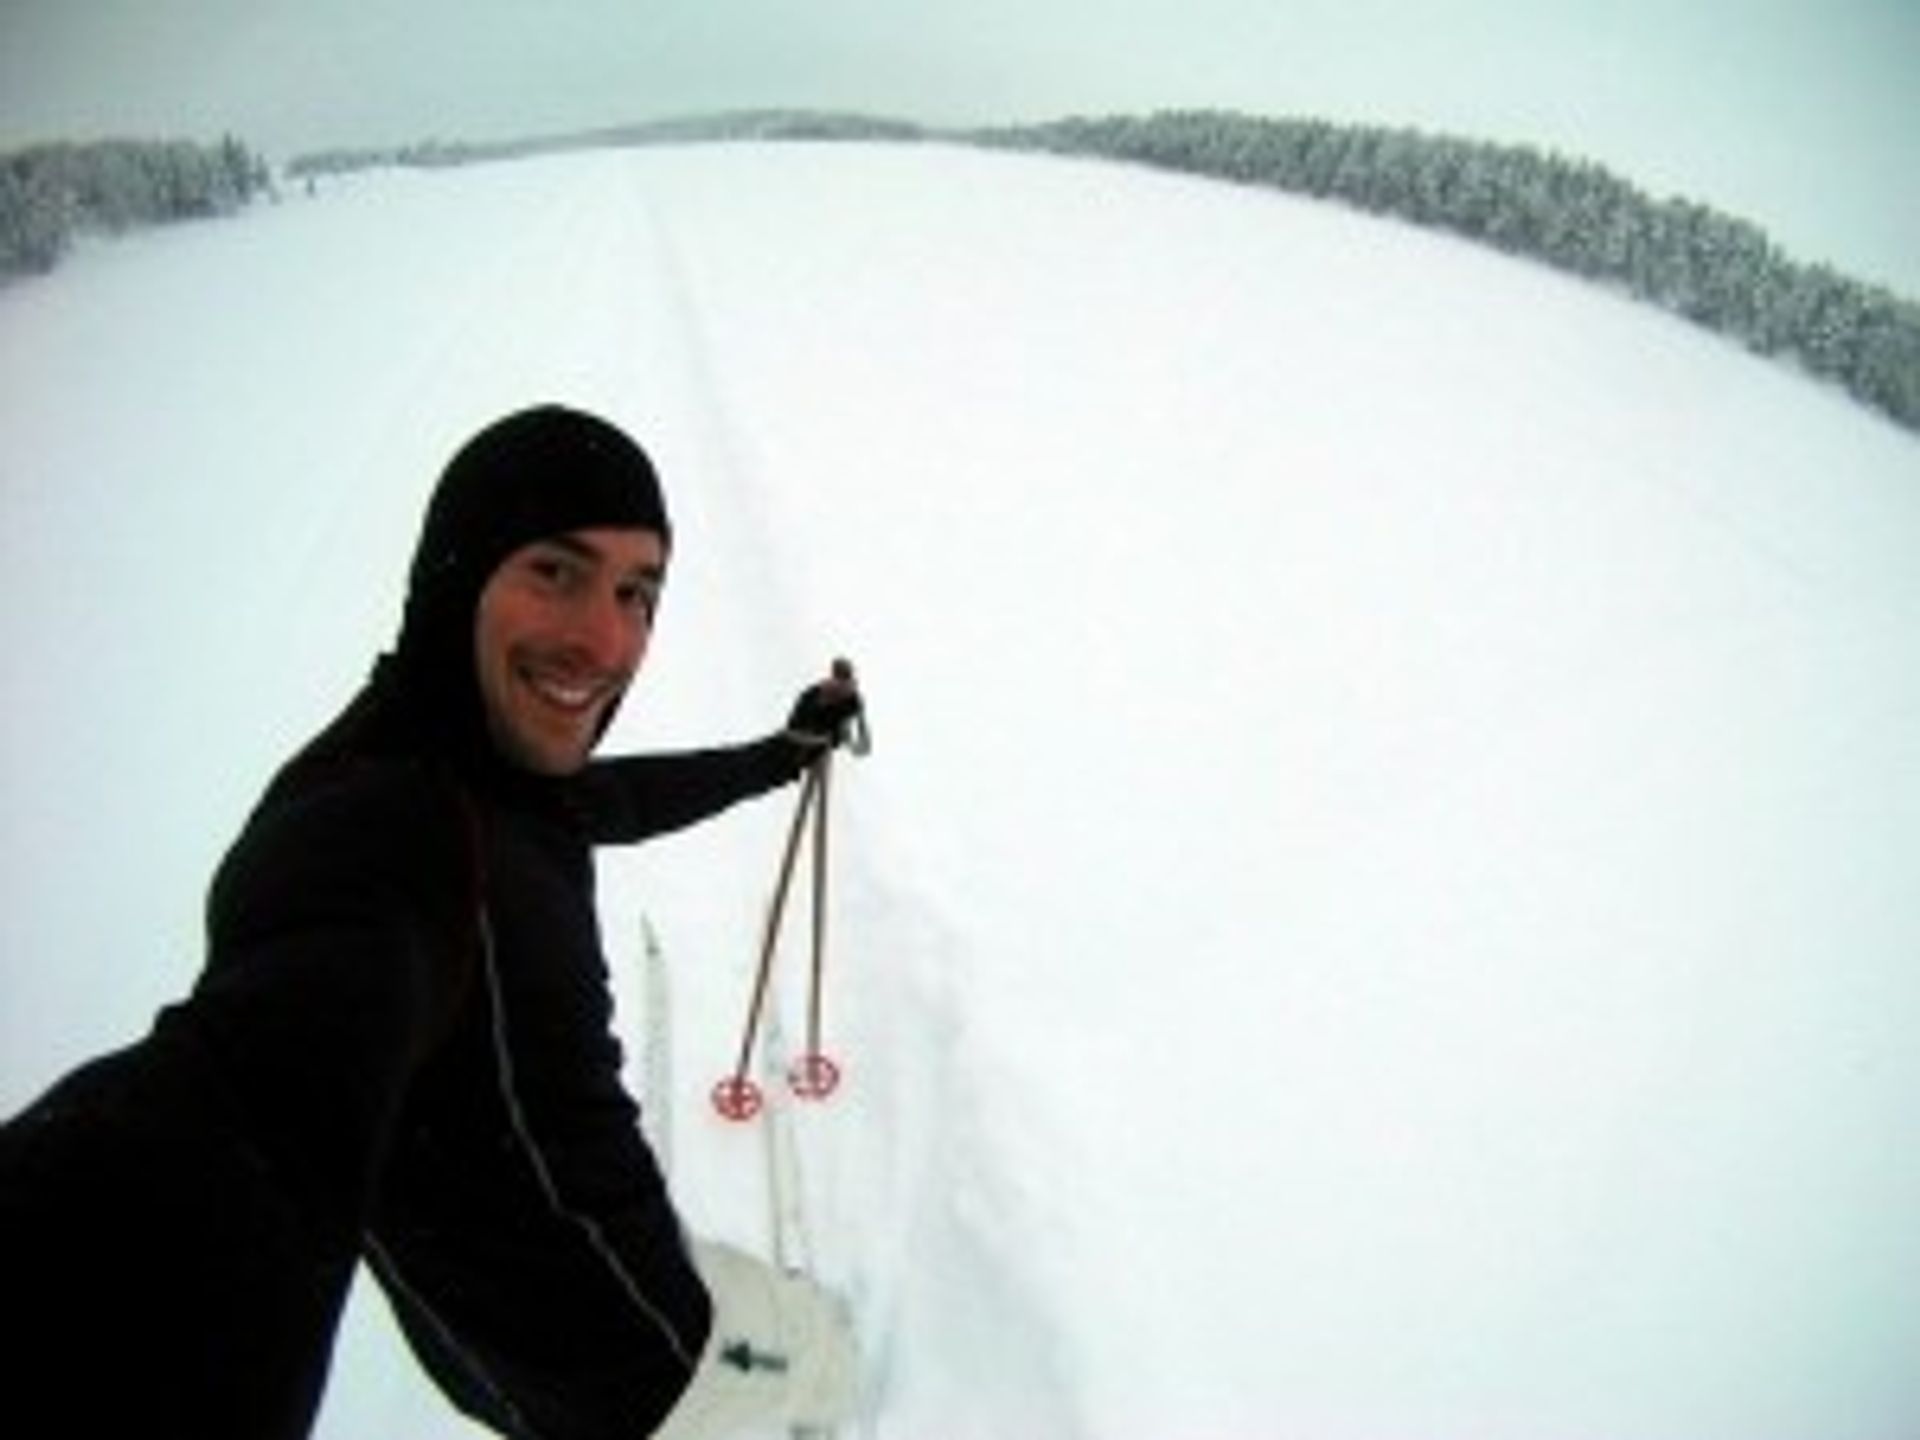 Our ambassador Jesus skiing in the snow.